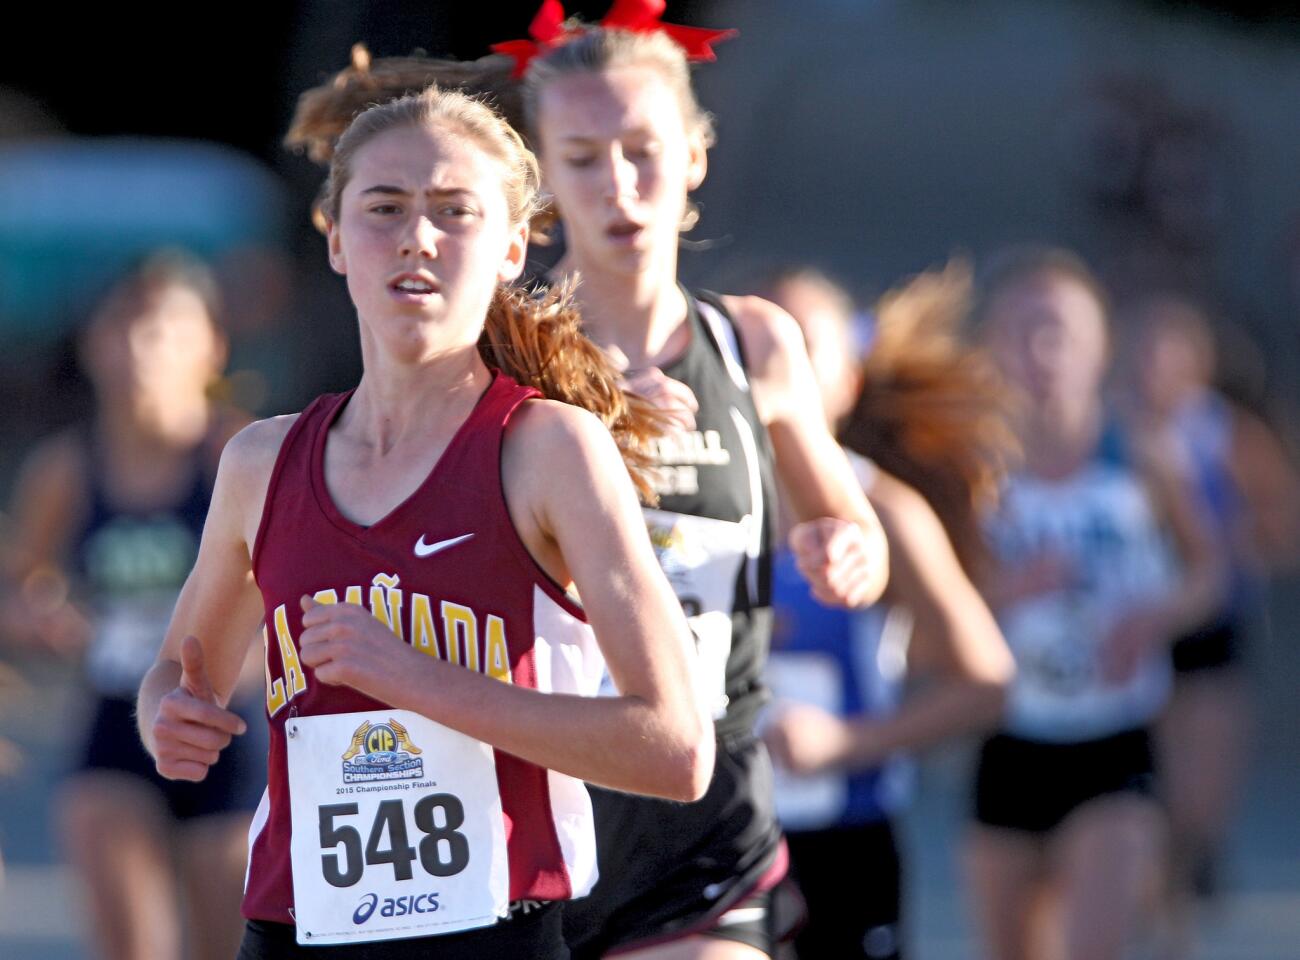 La Cañada High School's #548 Katie Scoville was able to pass all runners and win the CIF Southern Section girls division 4 cross country finals at Mt. San Antonio College in Walnut on Saturday; November 21, 2015.